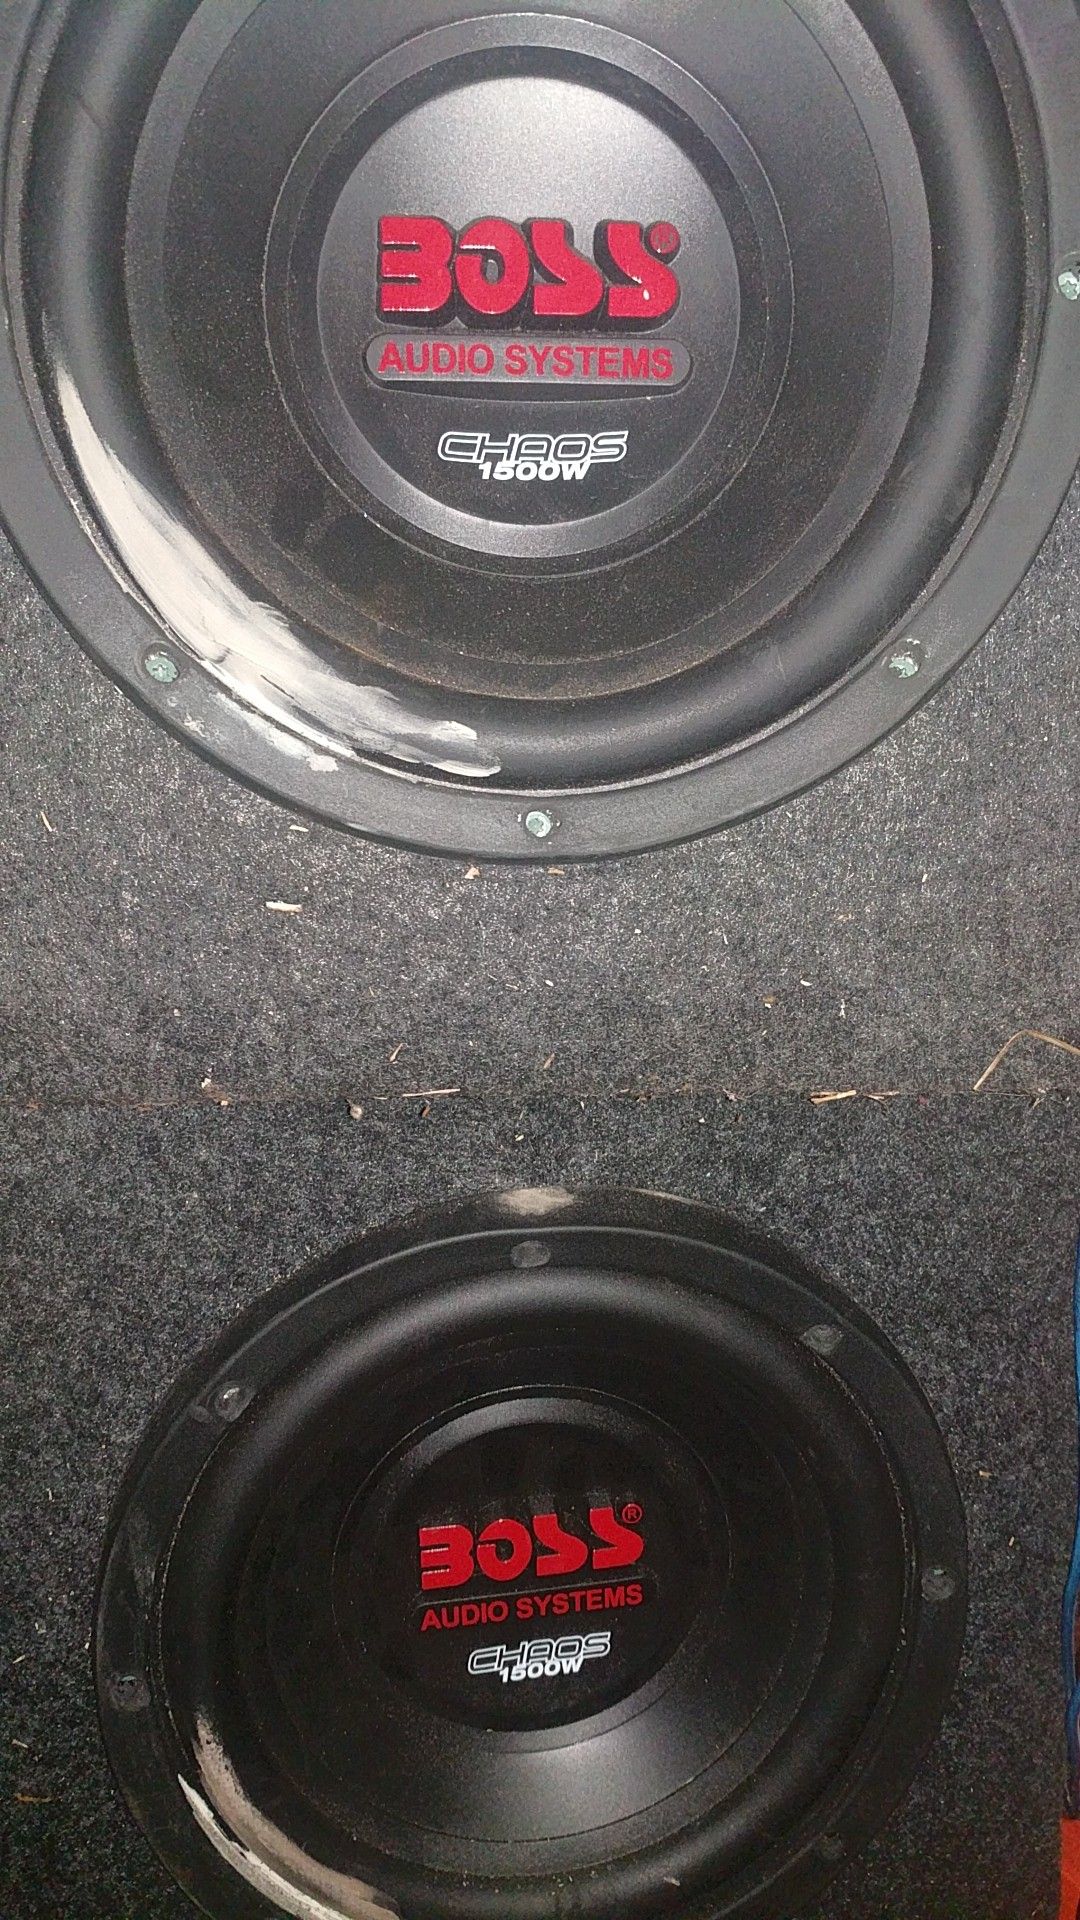 10 inch boss chaos 1500 watt subwoofers and two single boxes